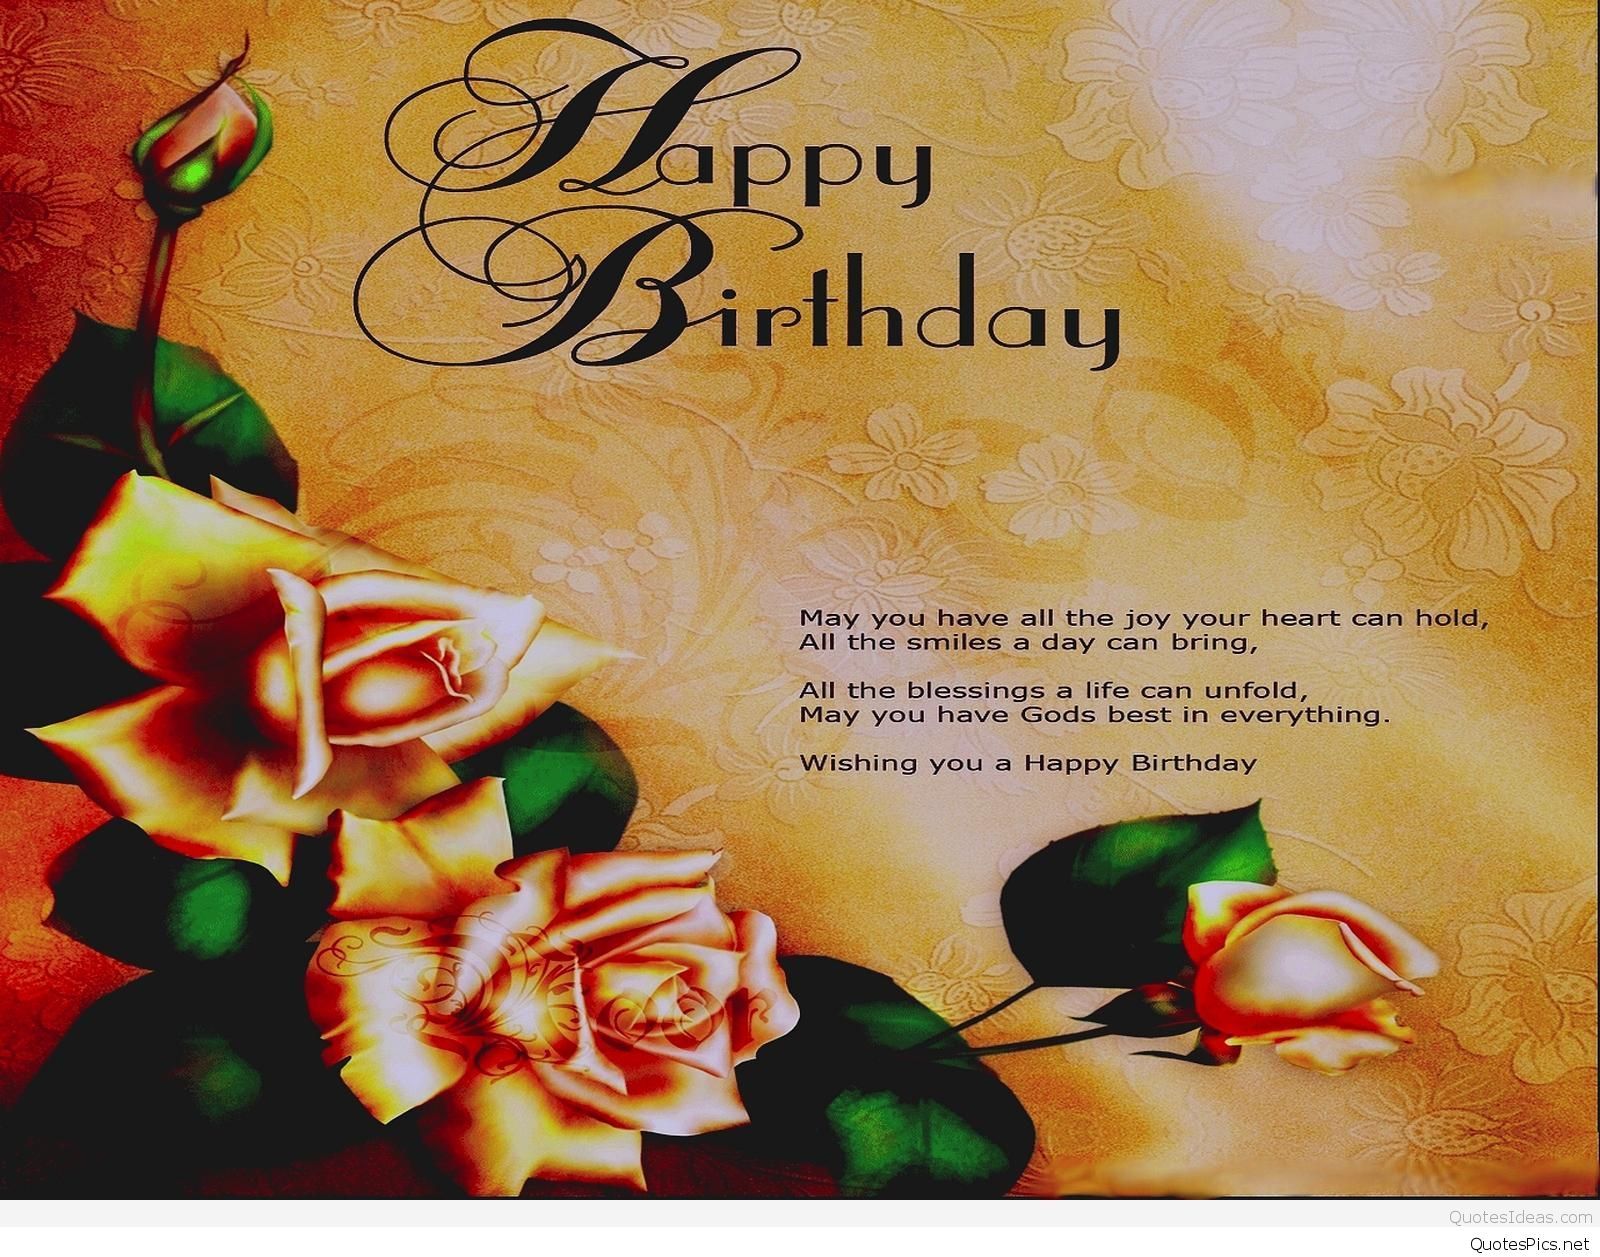 Birthday Cards Quotes And Wishes Wallpapers - Happy Birth Day Wish Hd , HD Wallpaper & Backgrounds